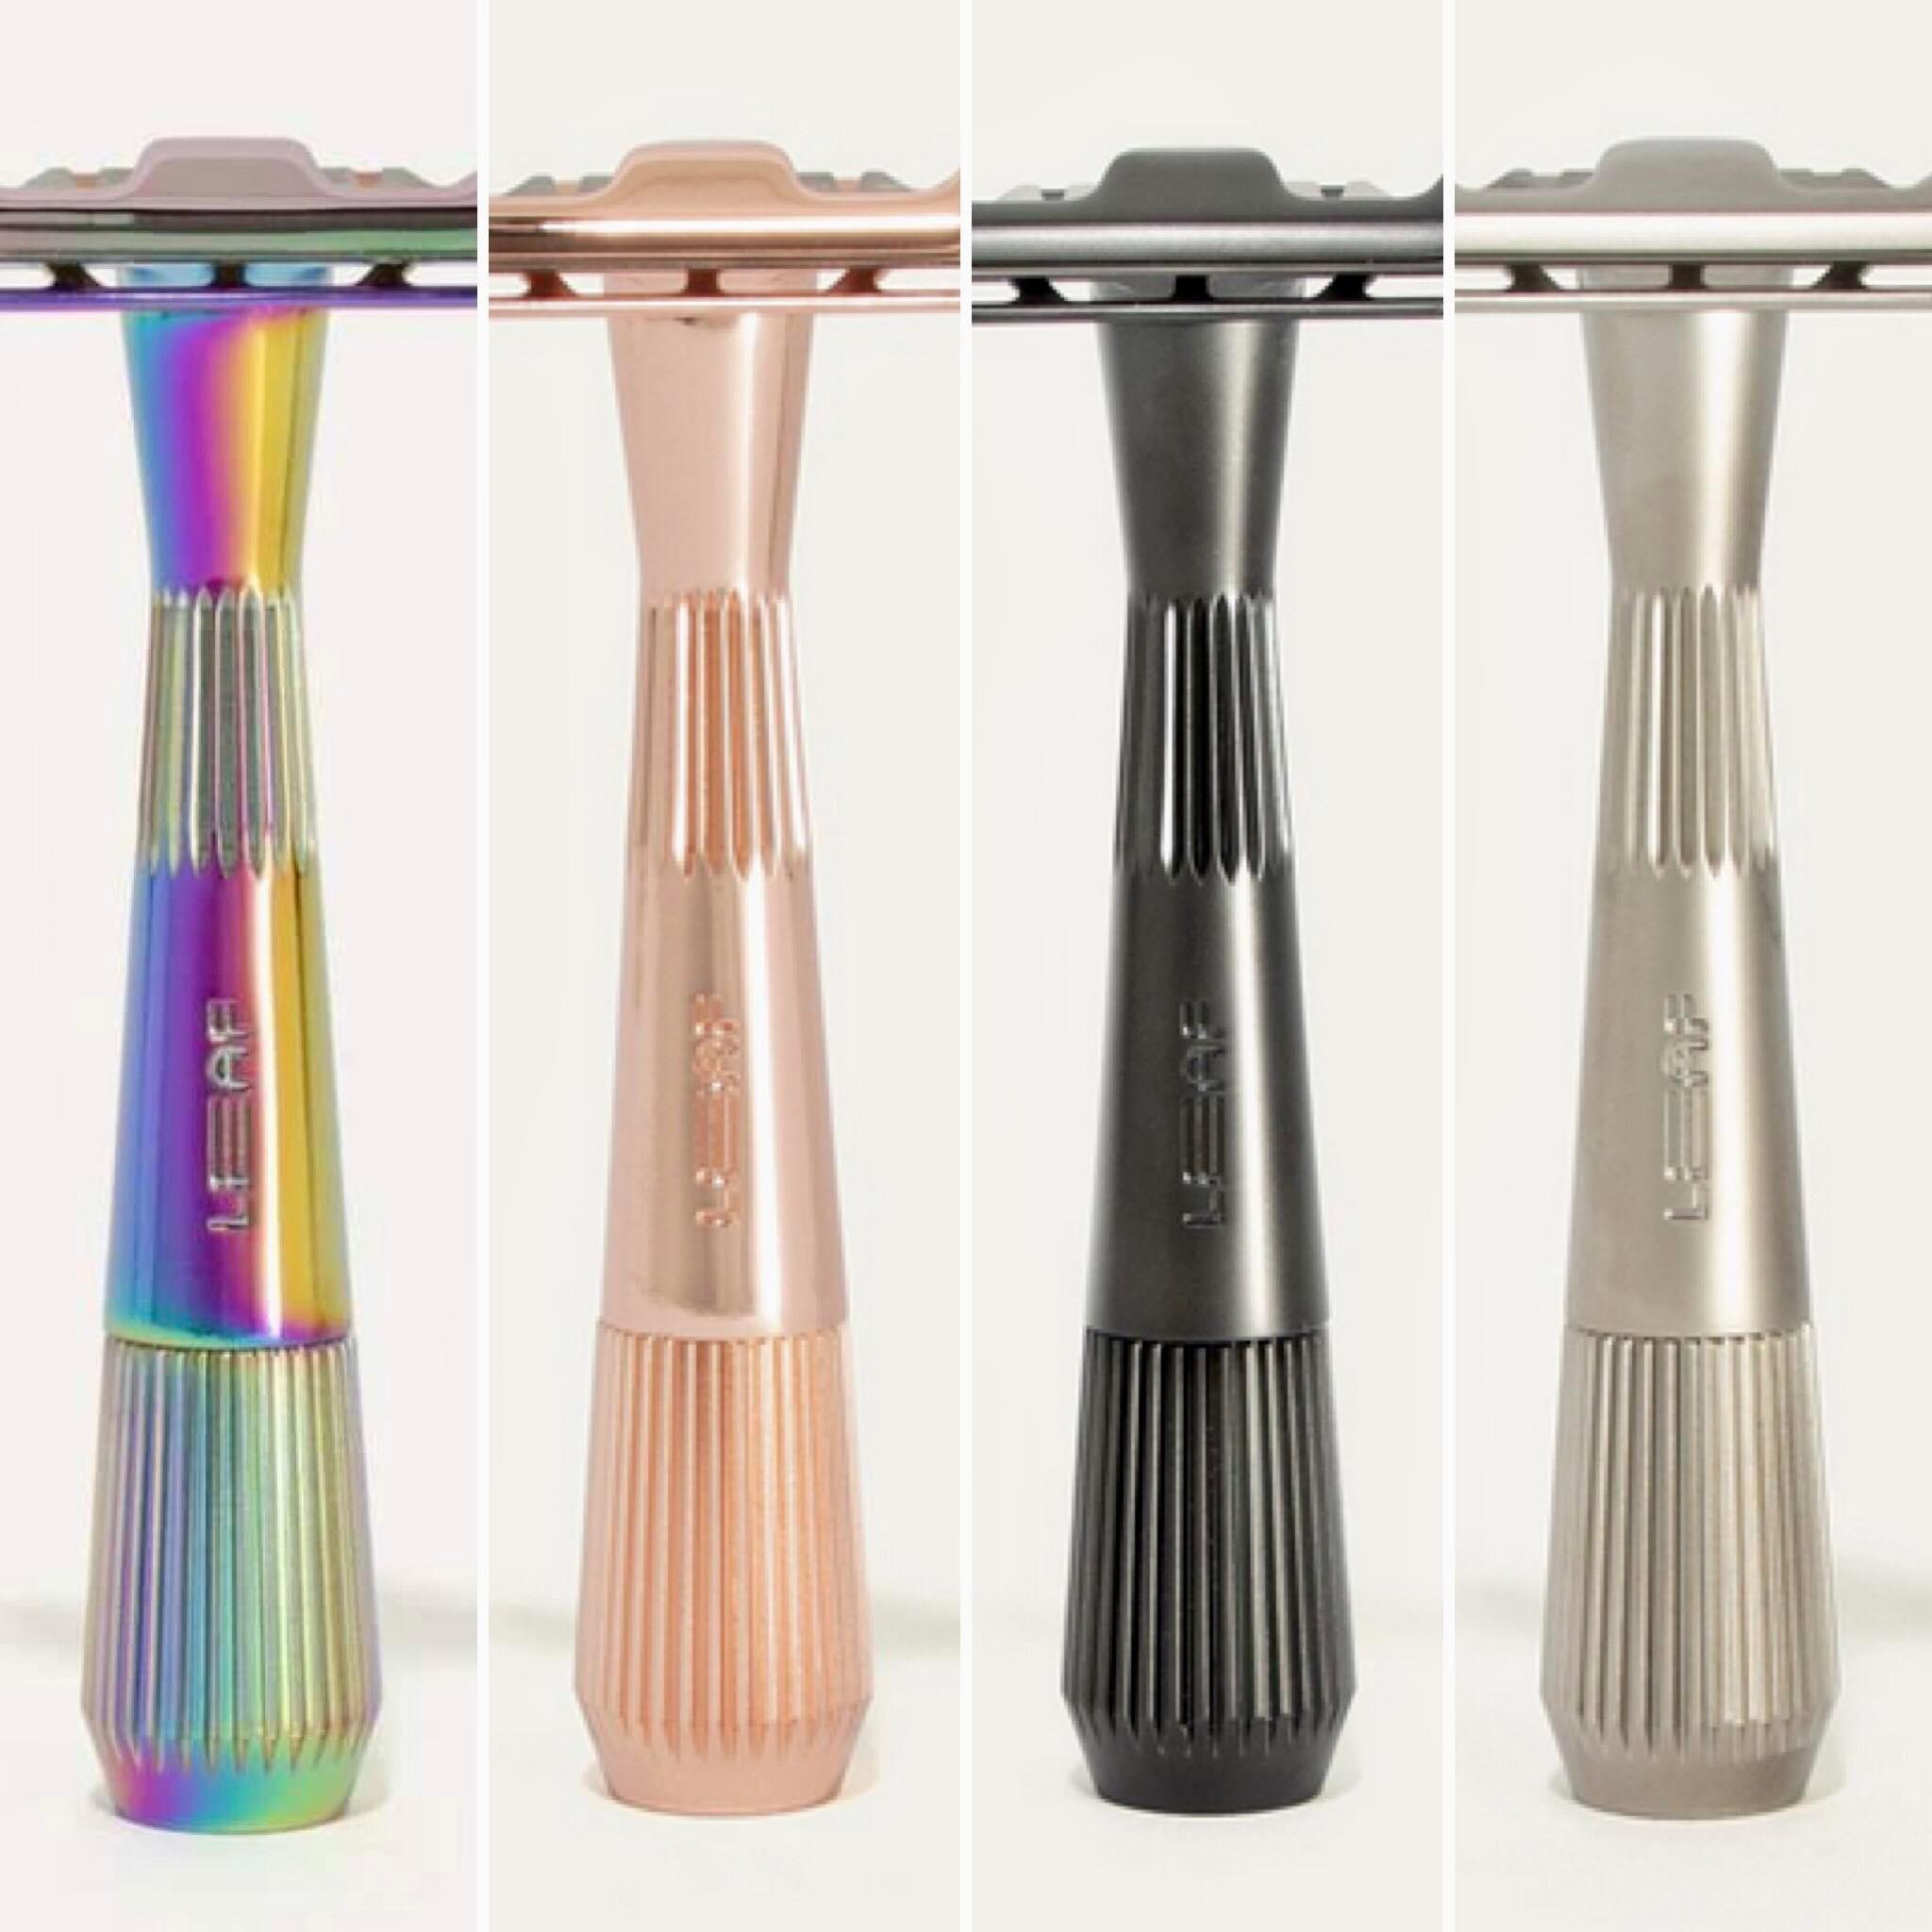 The Twig Razor - the universally loved single-edged sensitive skin razor available in prism, rose gold, black and silver finishes